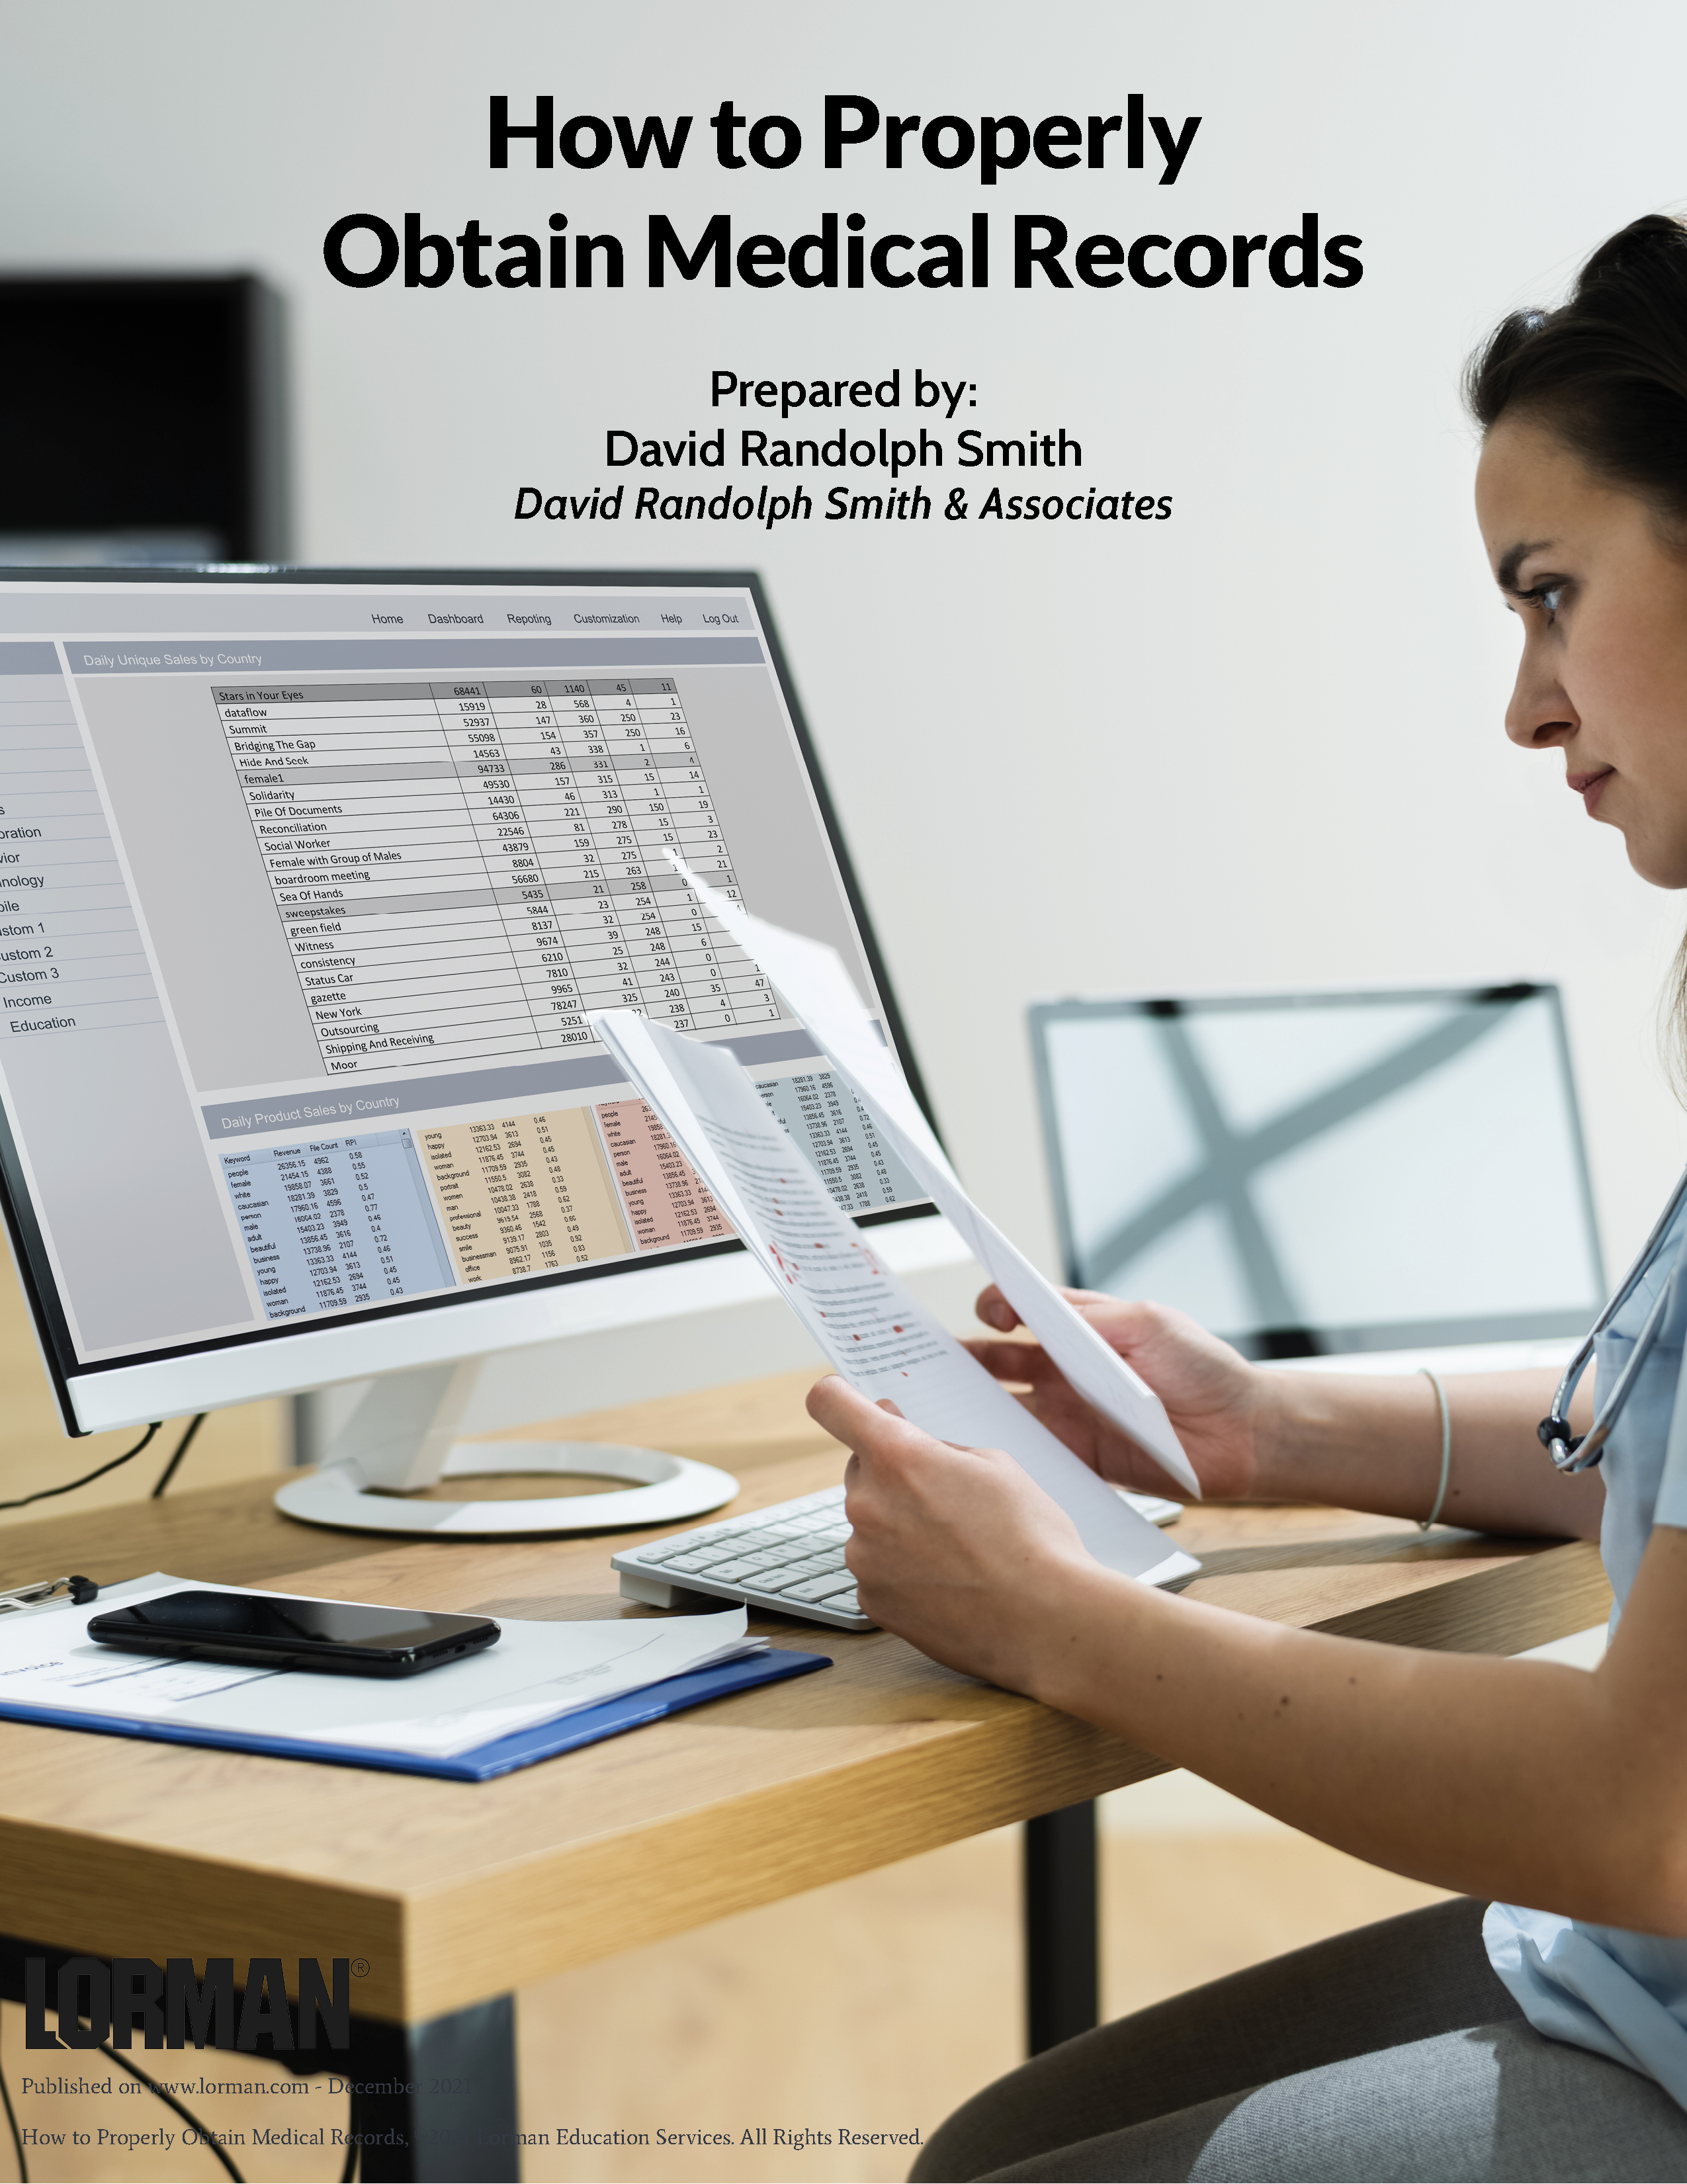 How to Properly Obtain Medical Records